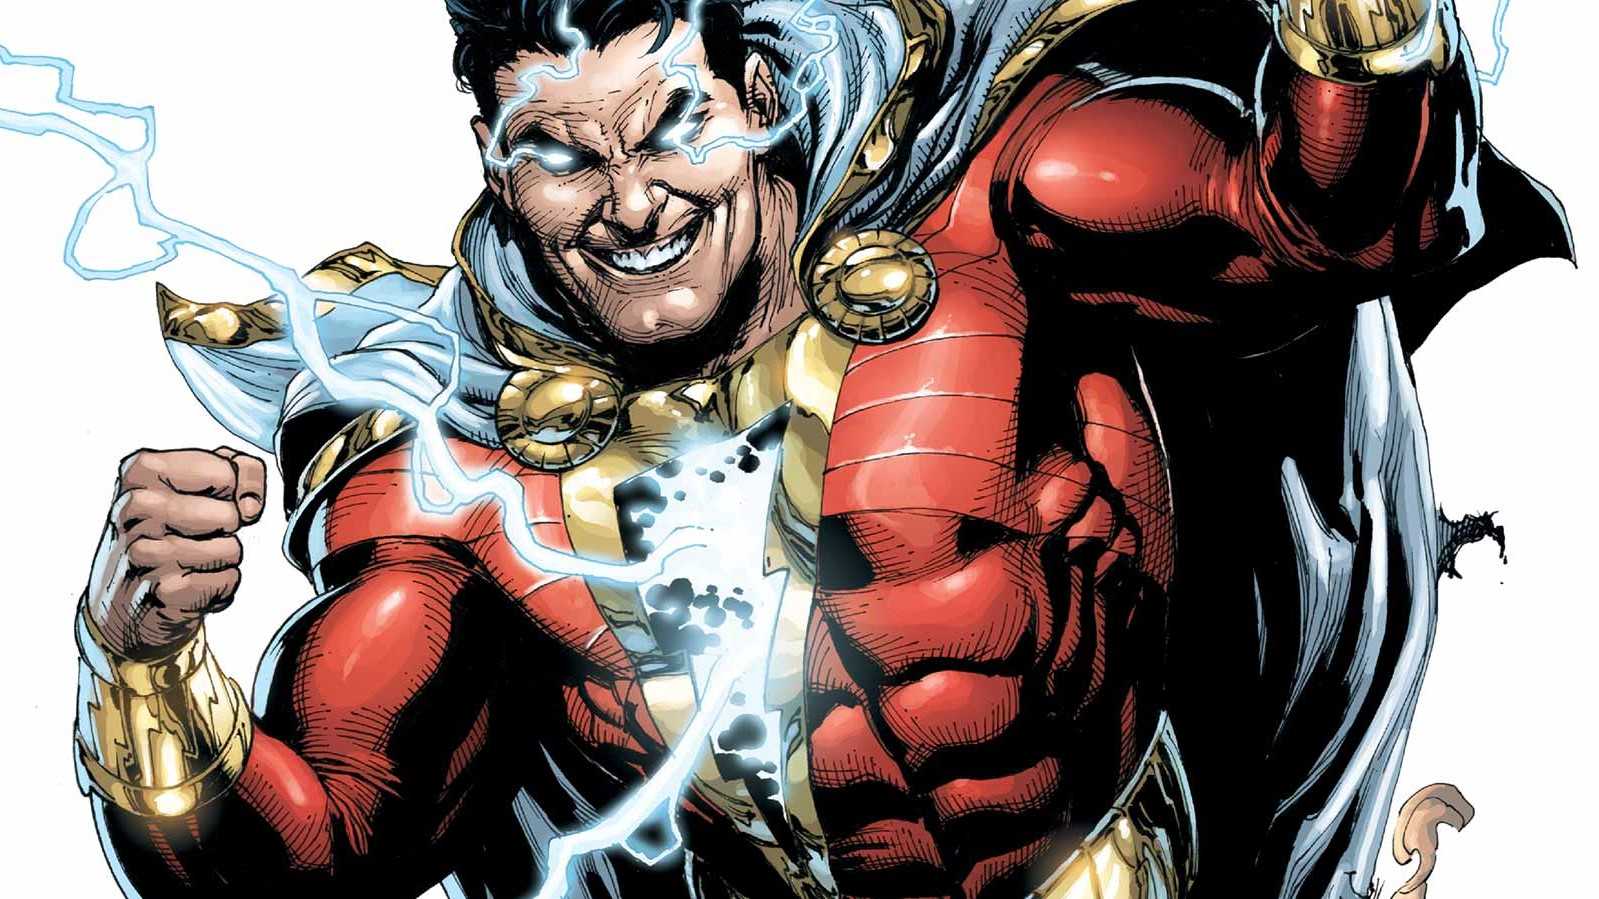 Comic Books to Read Now That You've Seen 'Shazam!'